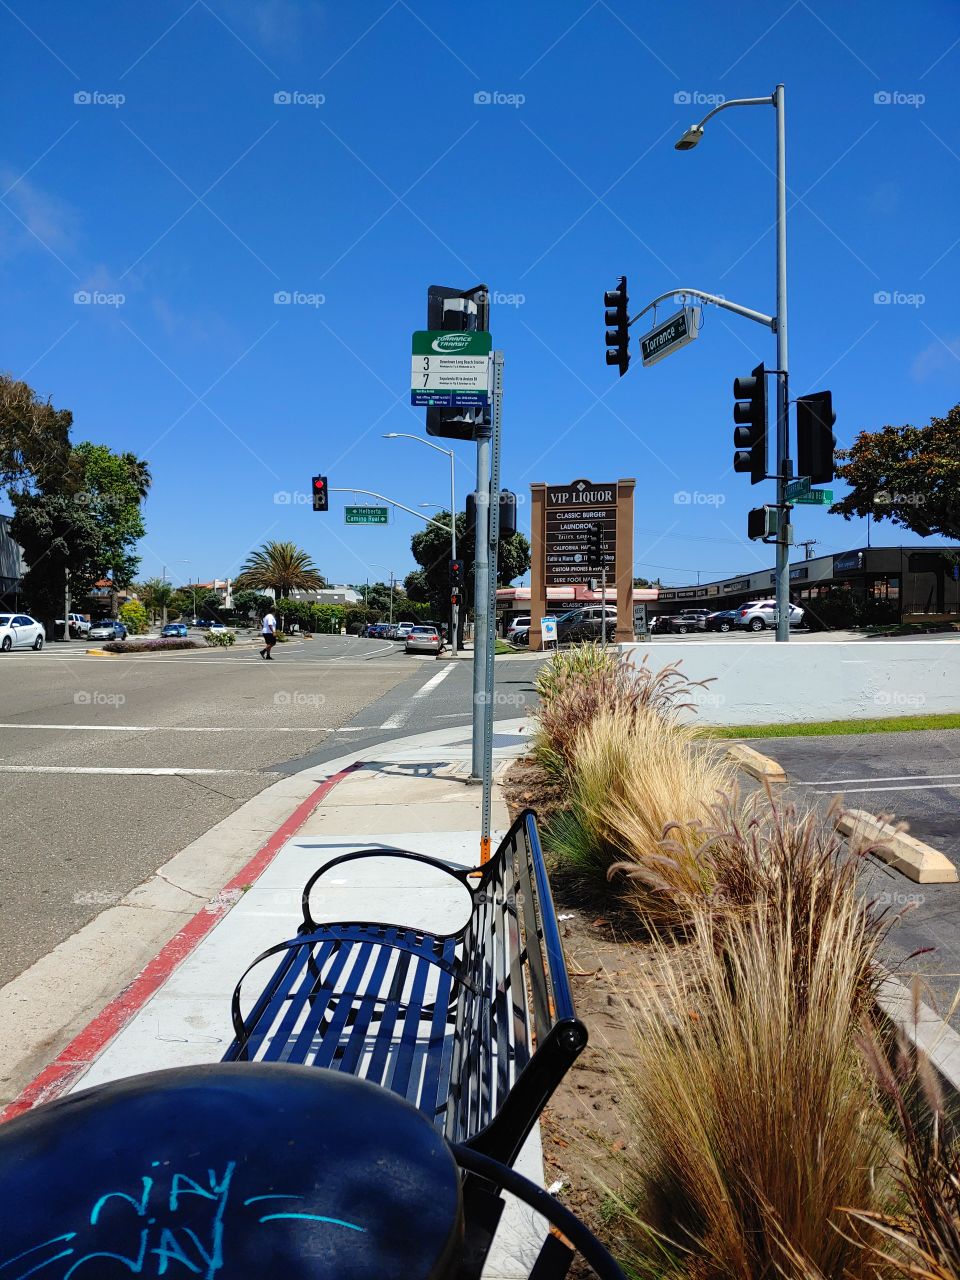 Photo view at the bus stop in Torrance